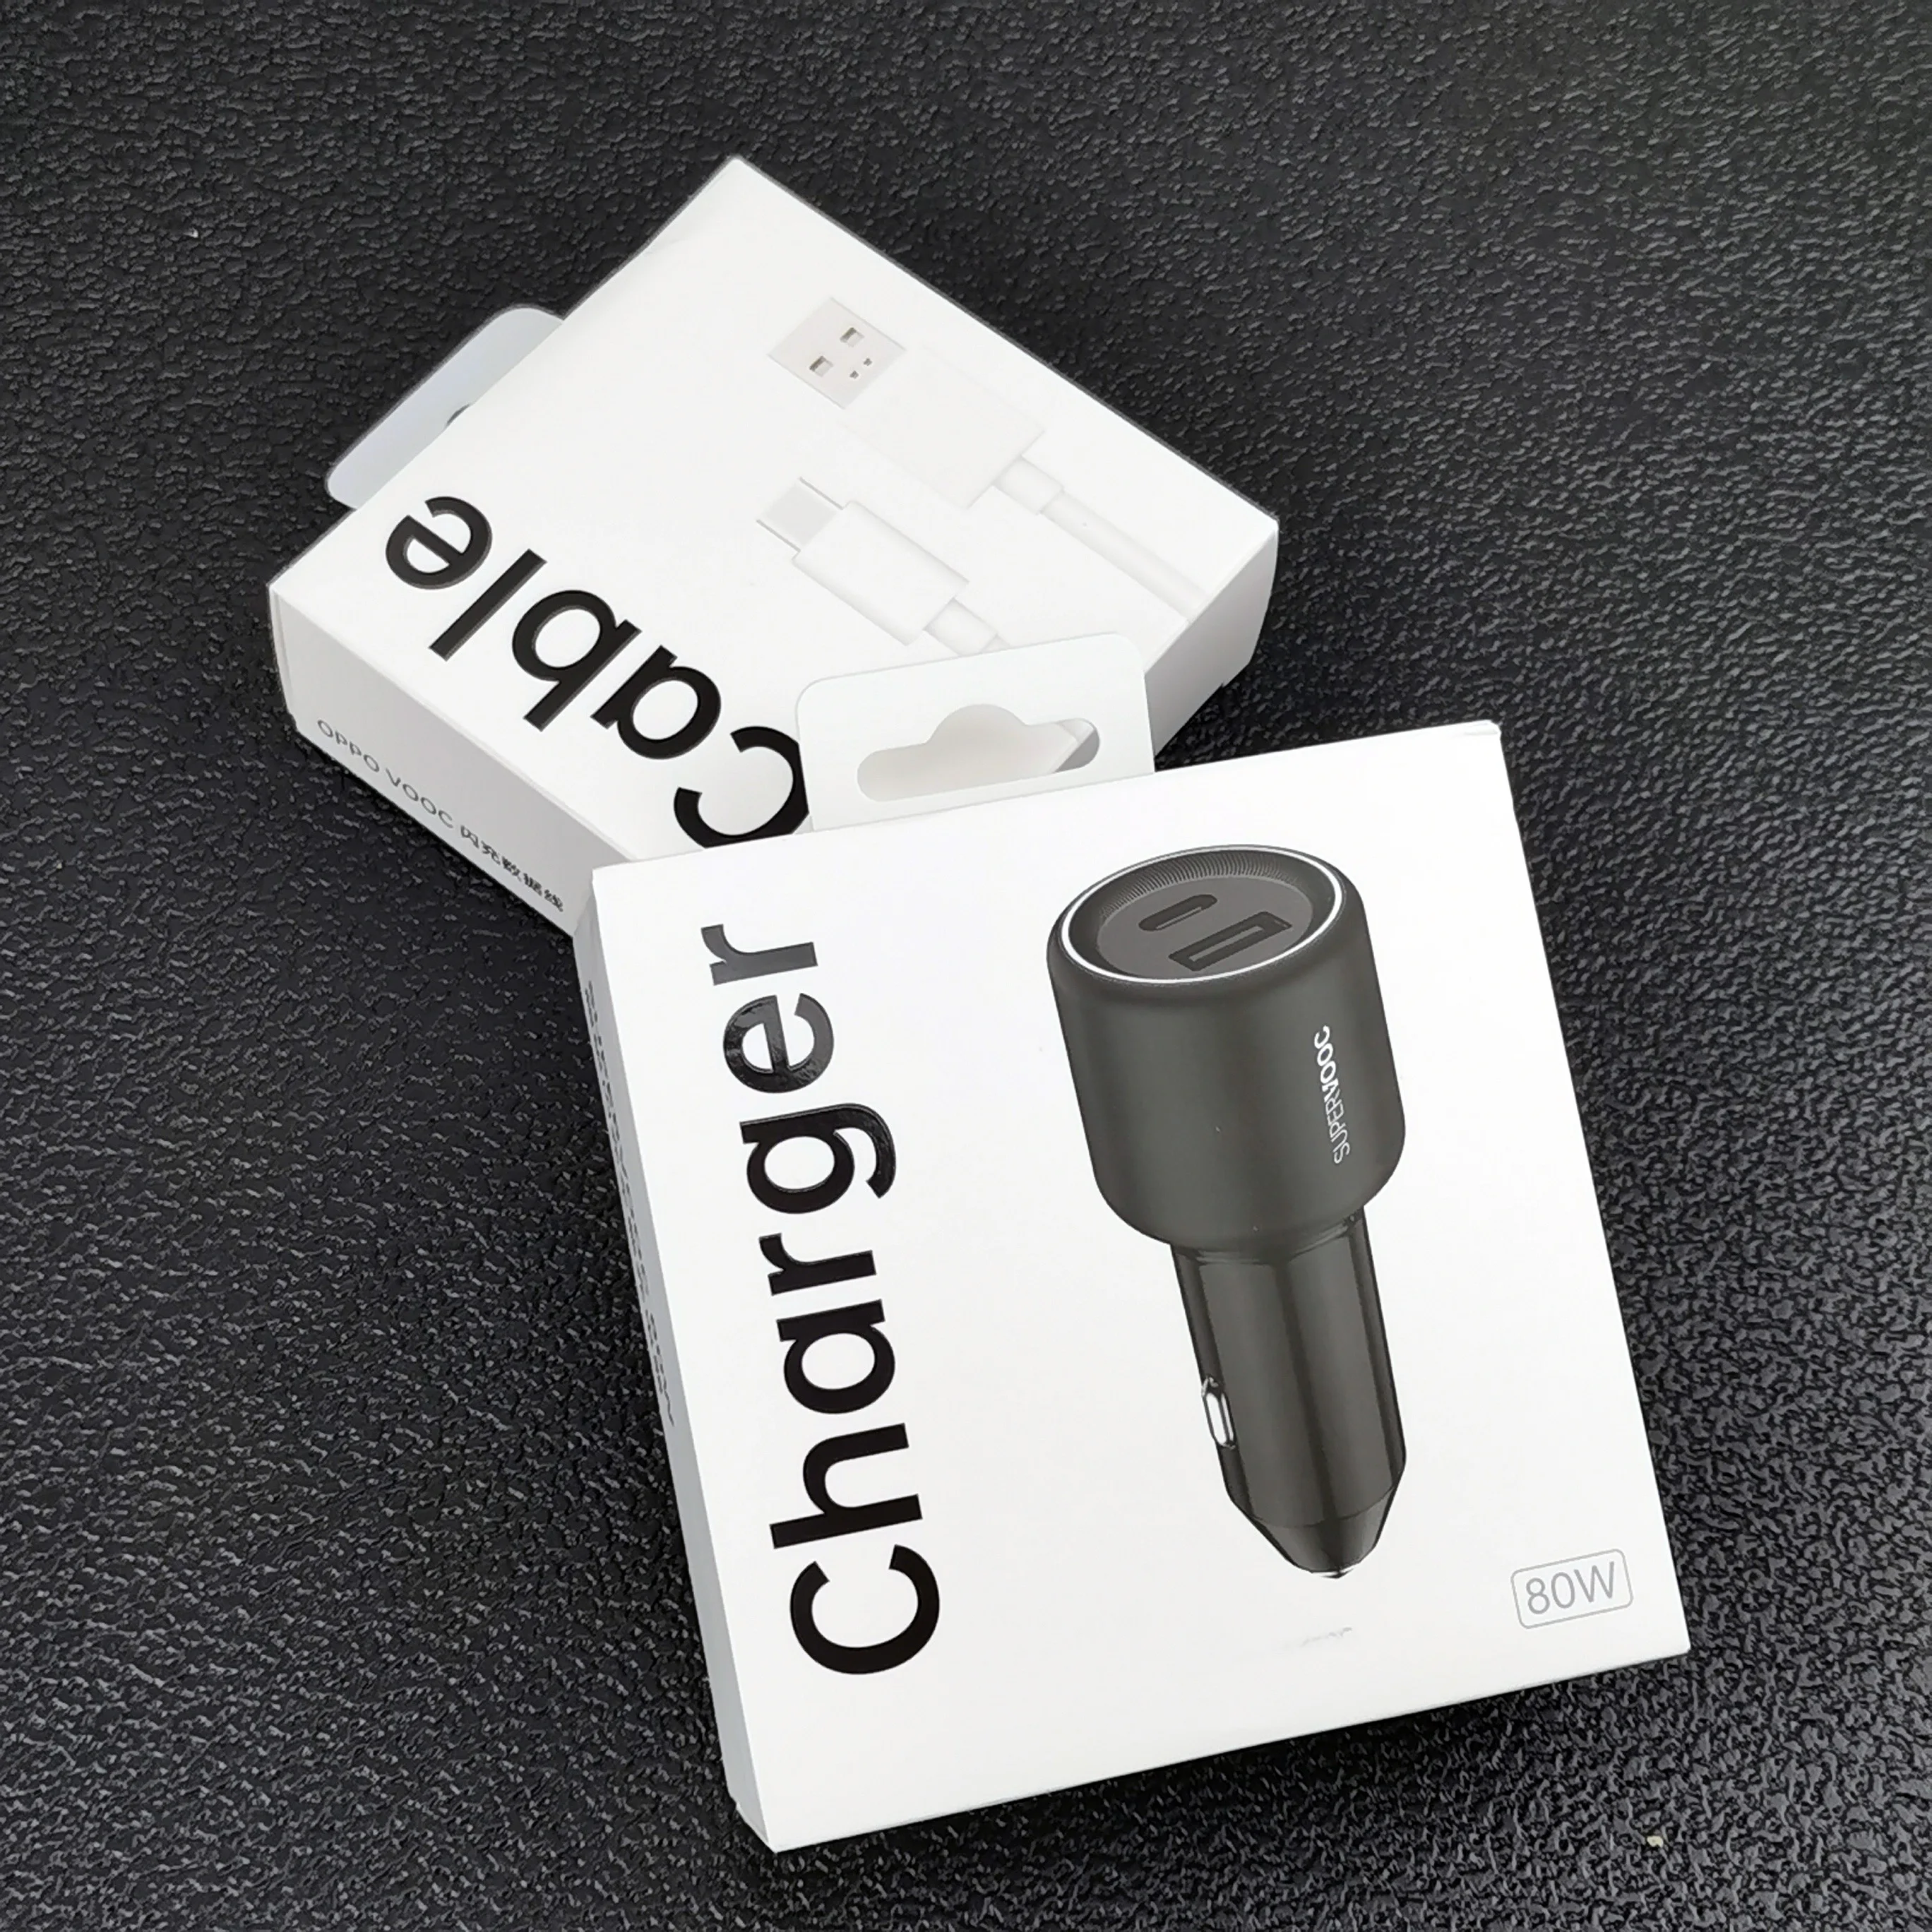 OnePlus Supervooc 80W Car Charger